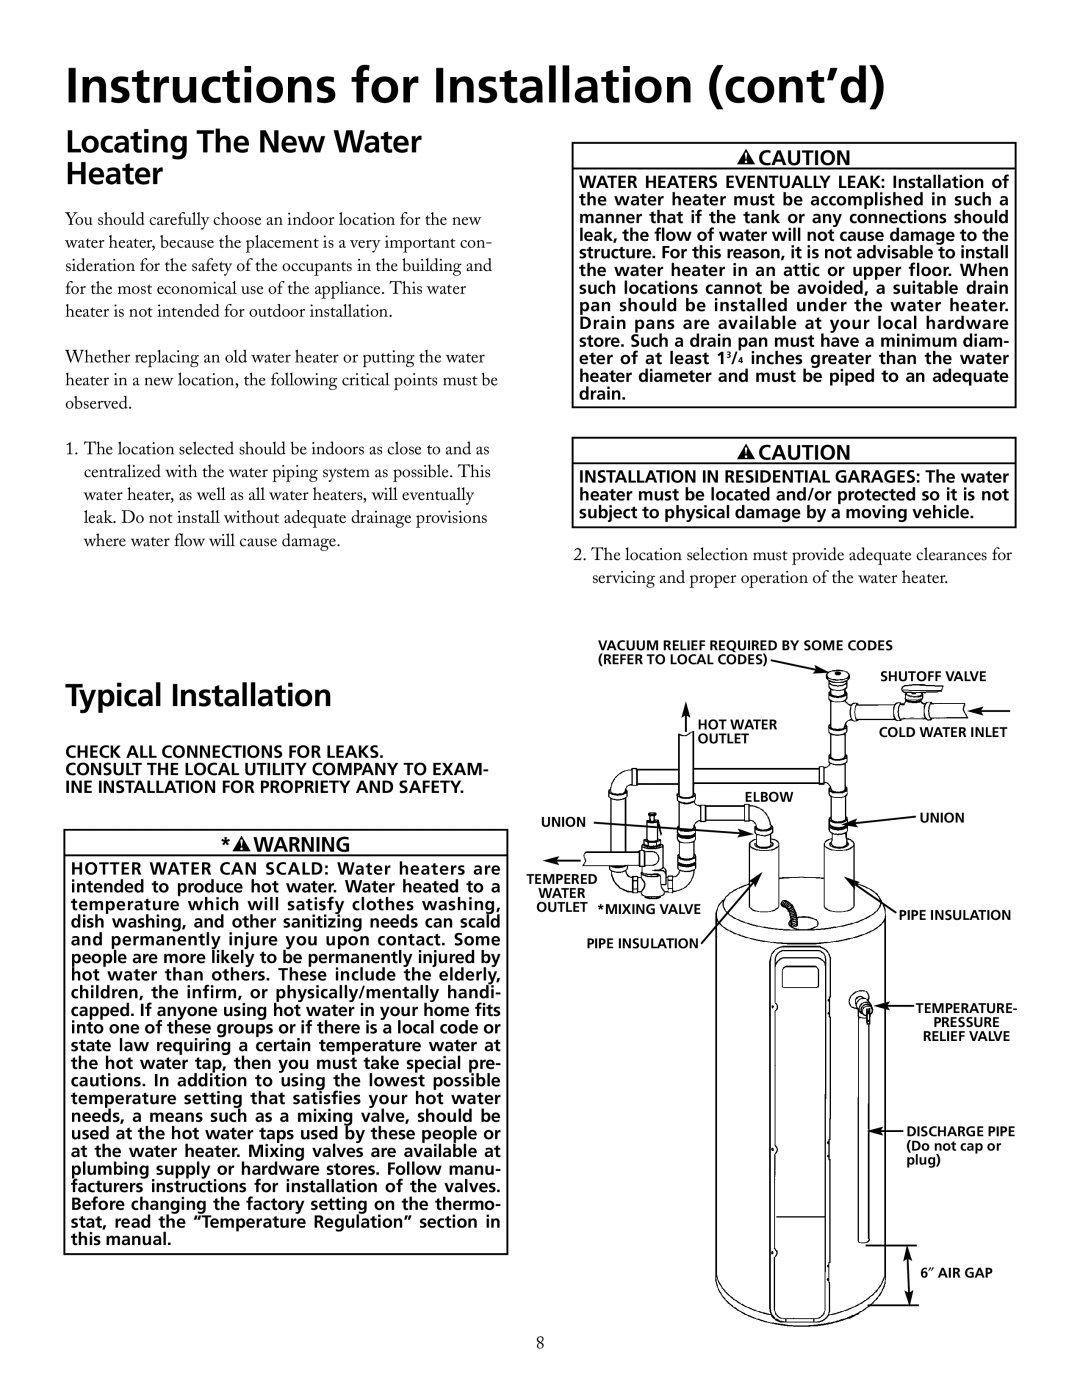 Maytag HRE21250PC, HRE21282PC Instructions for Installation cont’d, Locating The New Water Heater, Typical Installation 